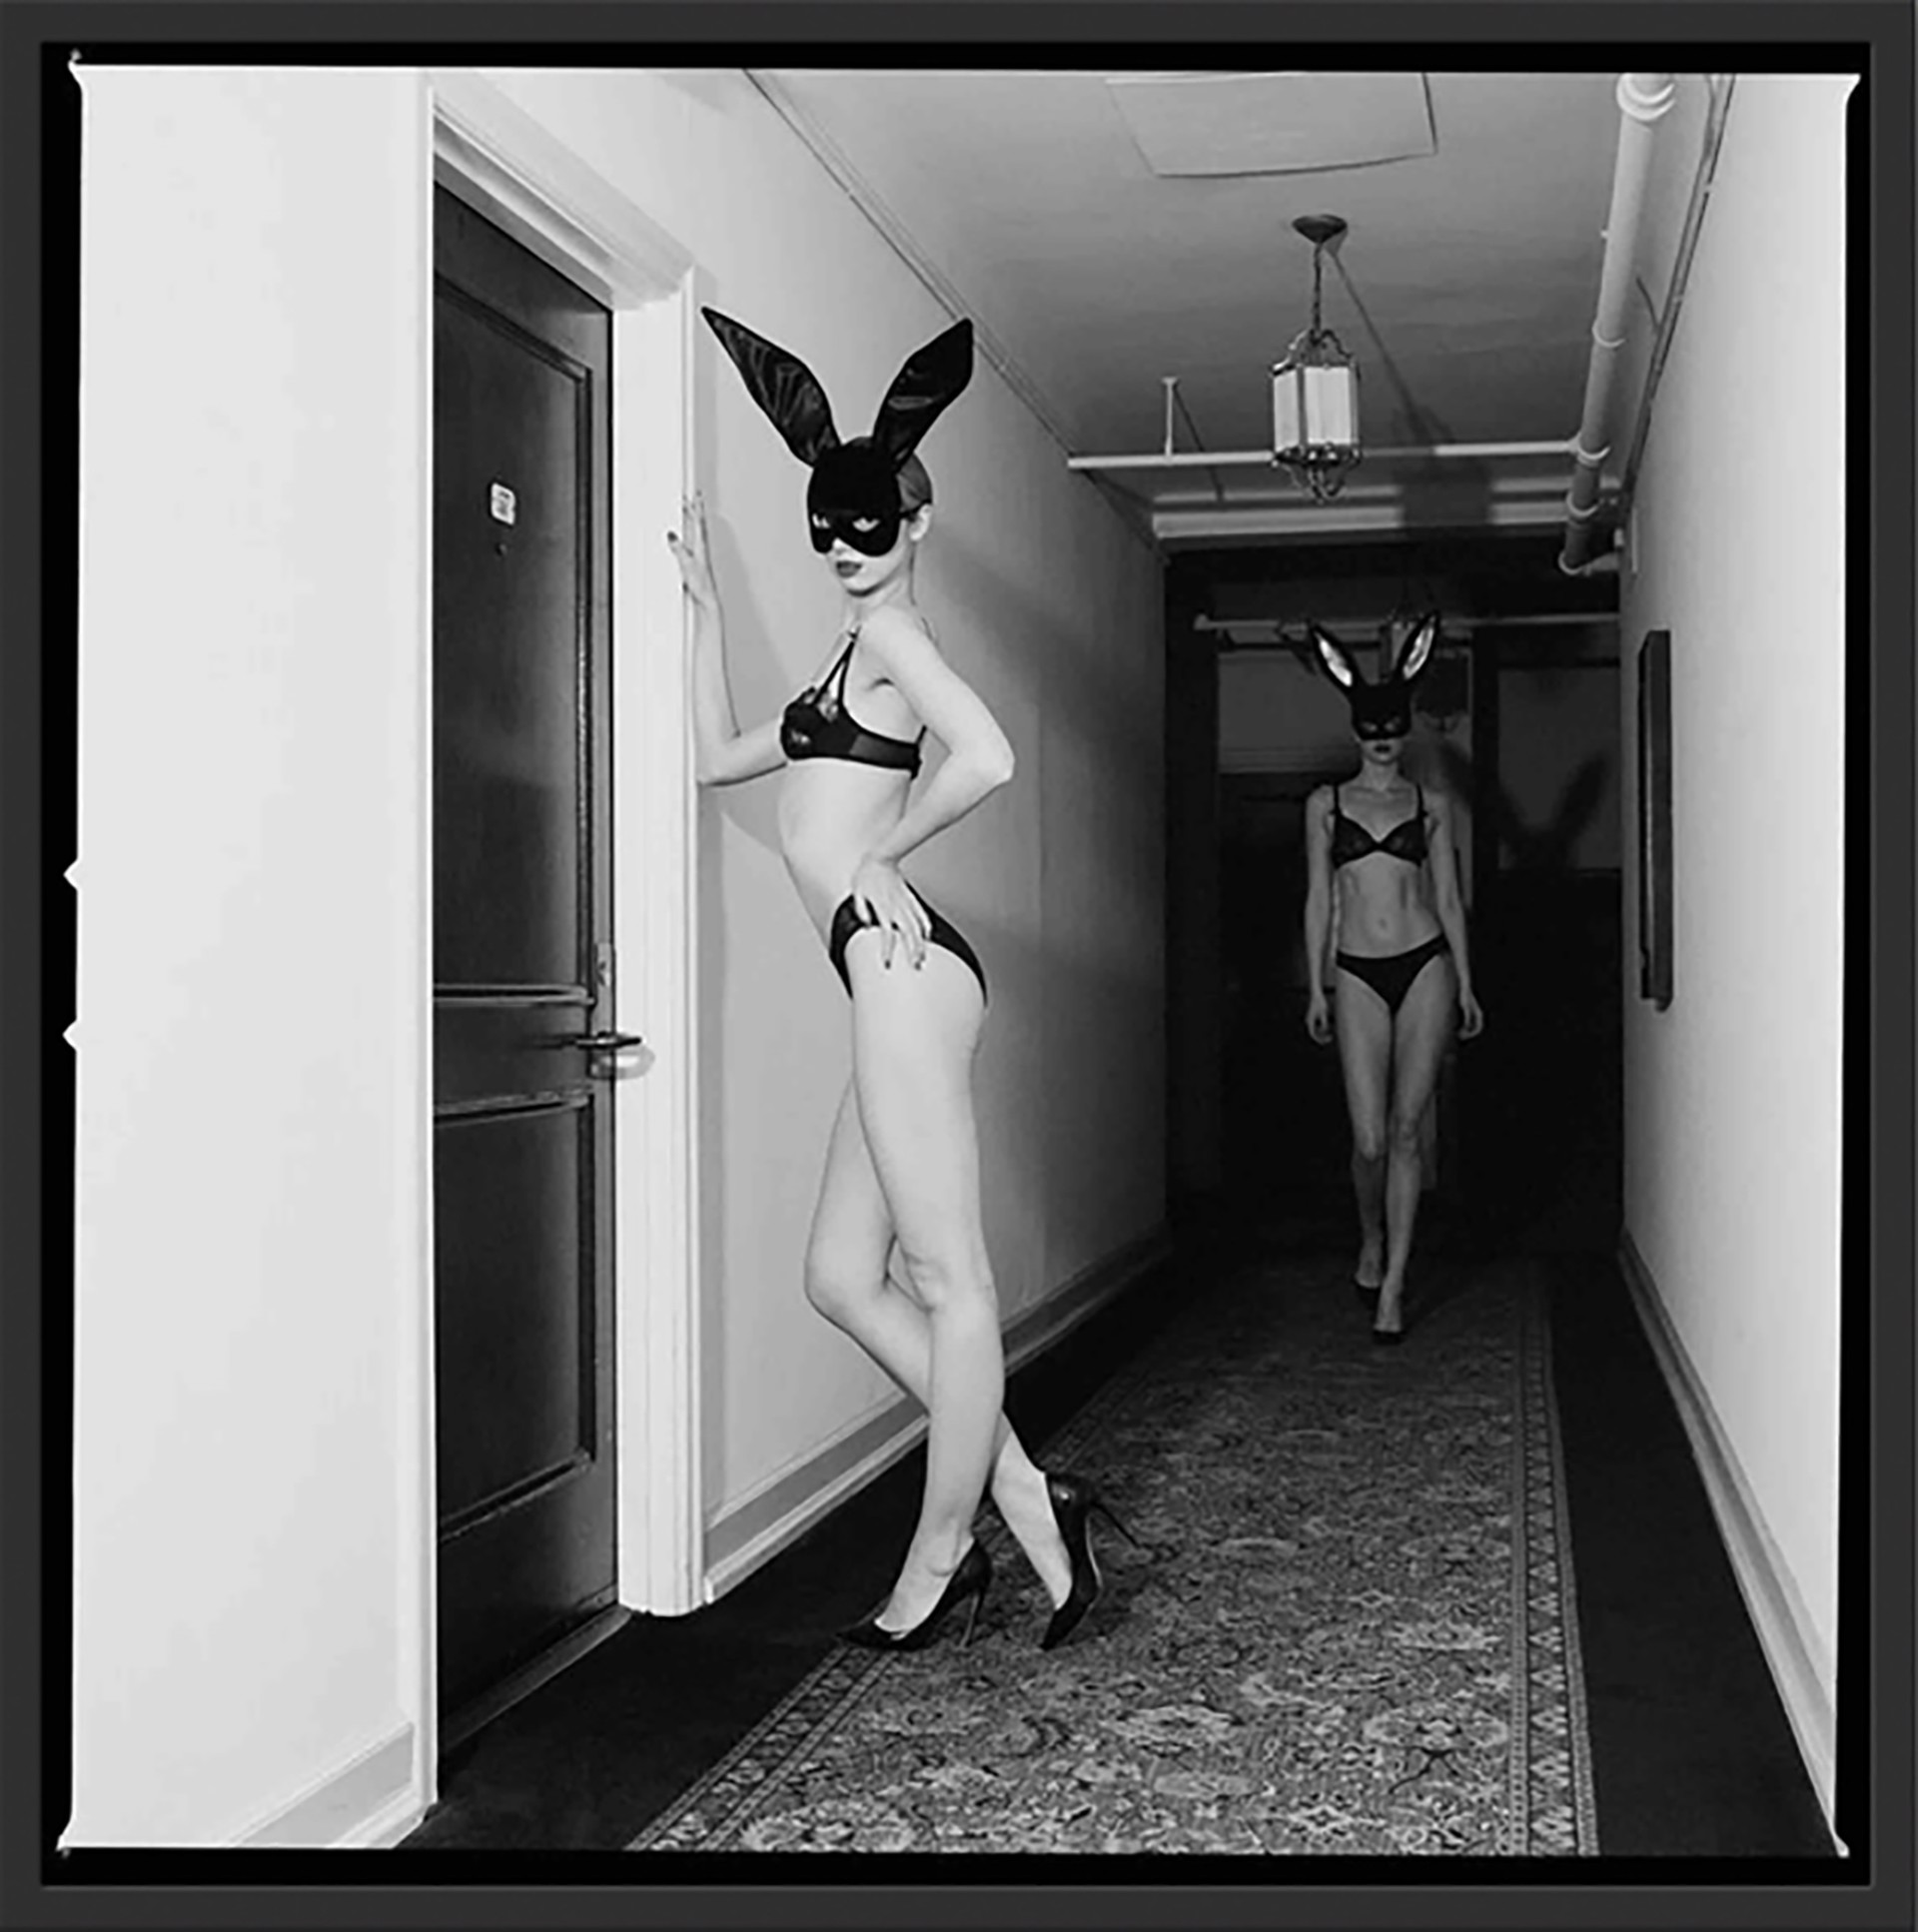 Chateau 57 by Tyler Shields